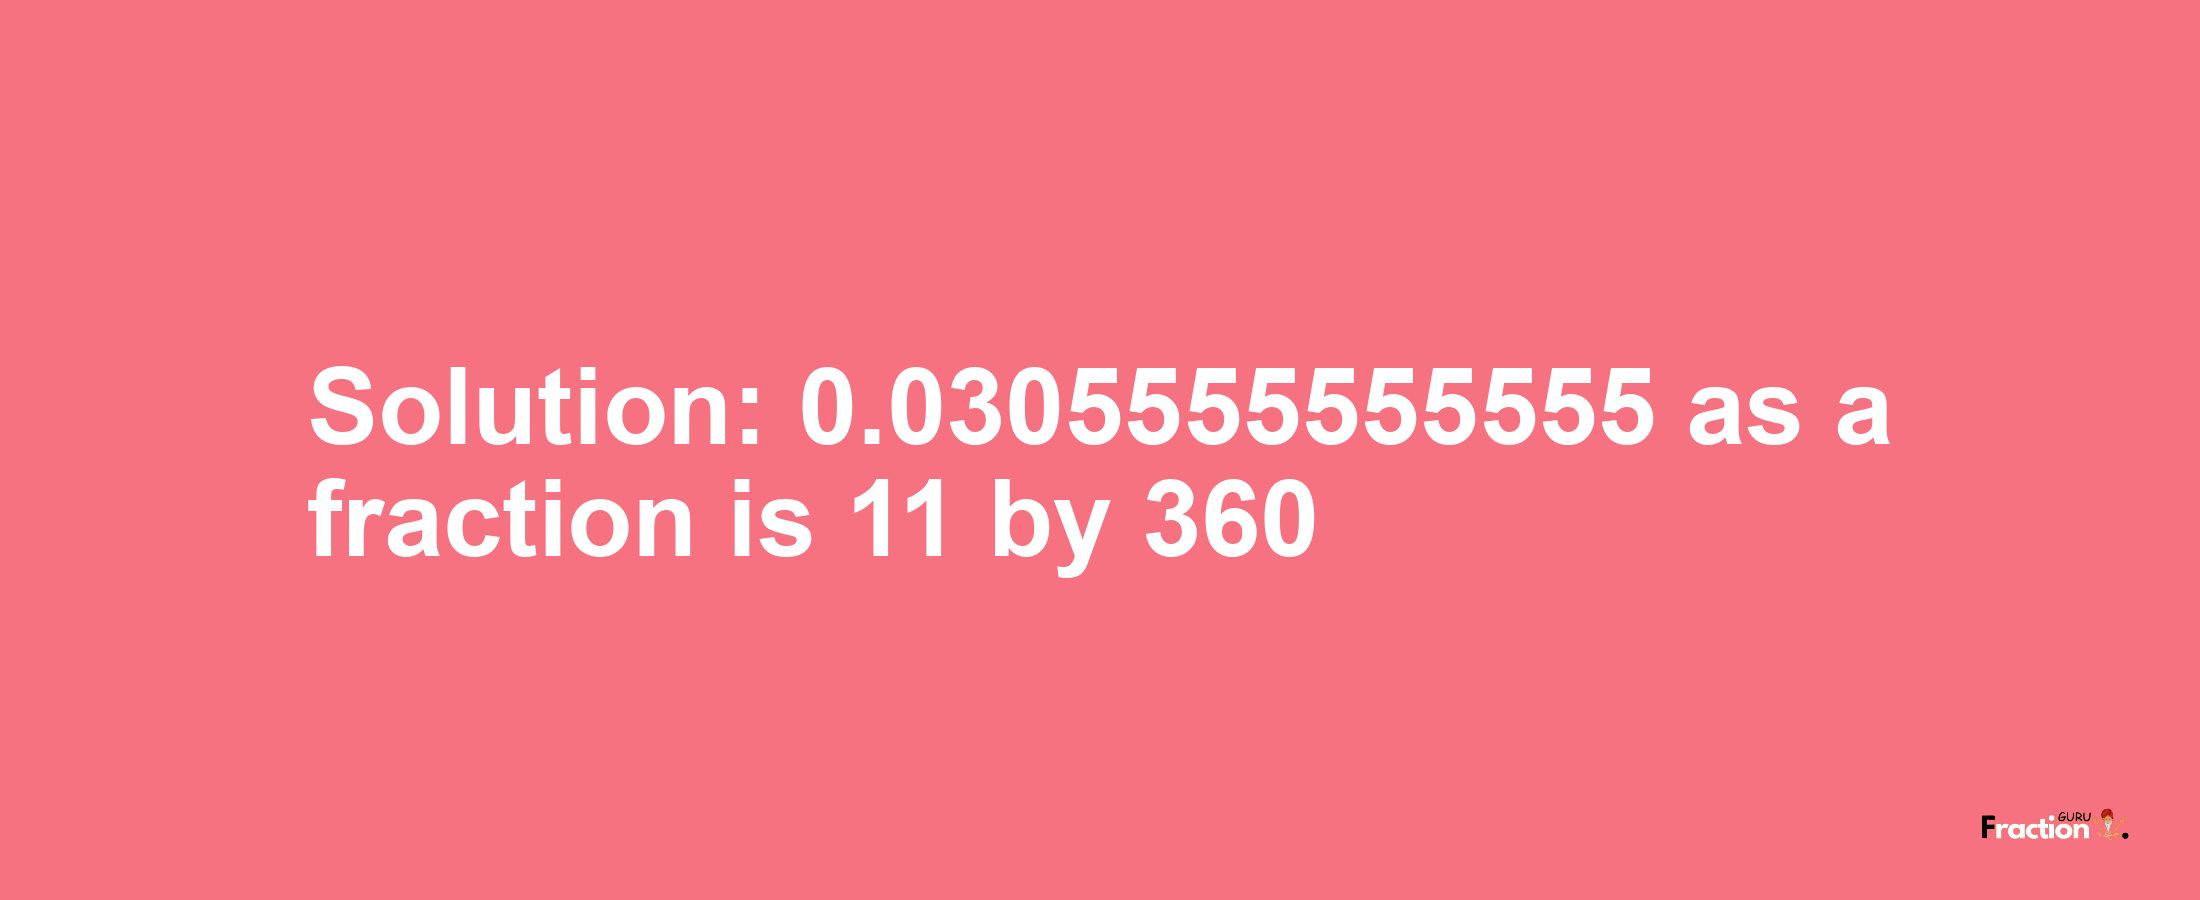 Solution:0.0305555555555 as a fraction is 11/360